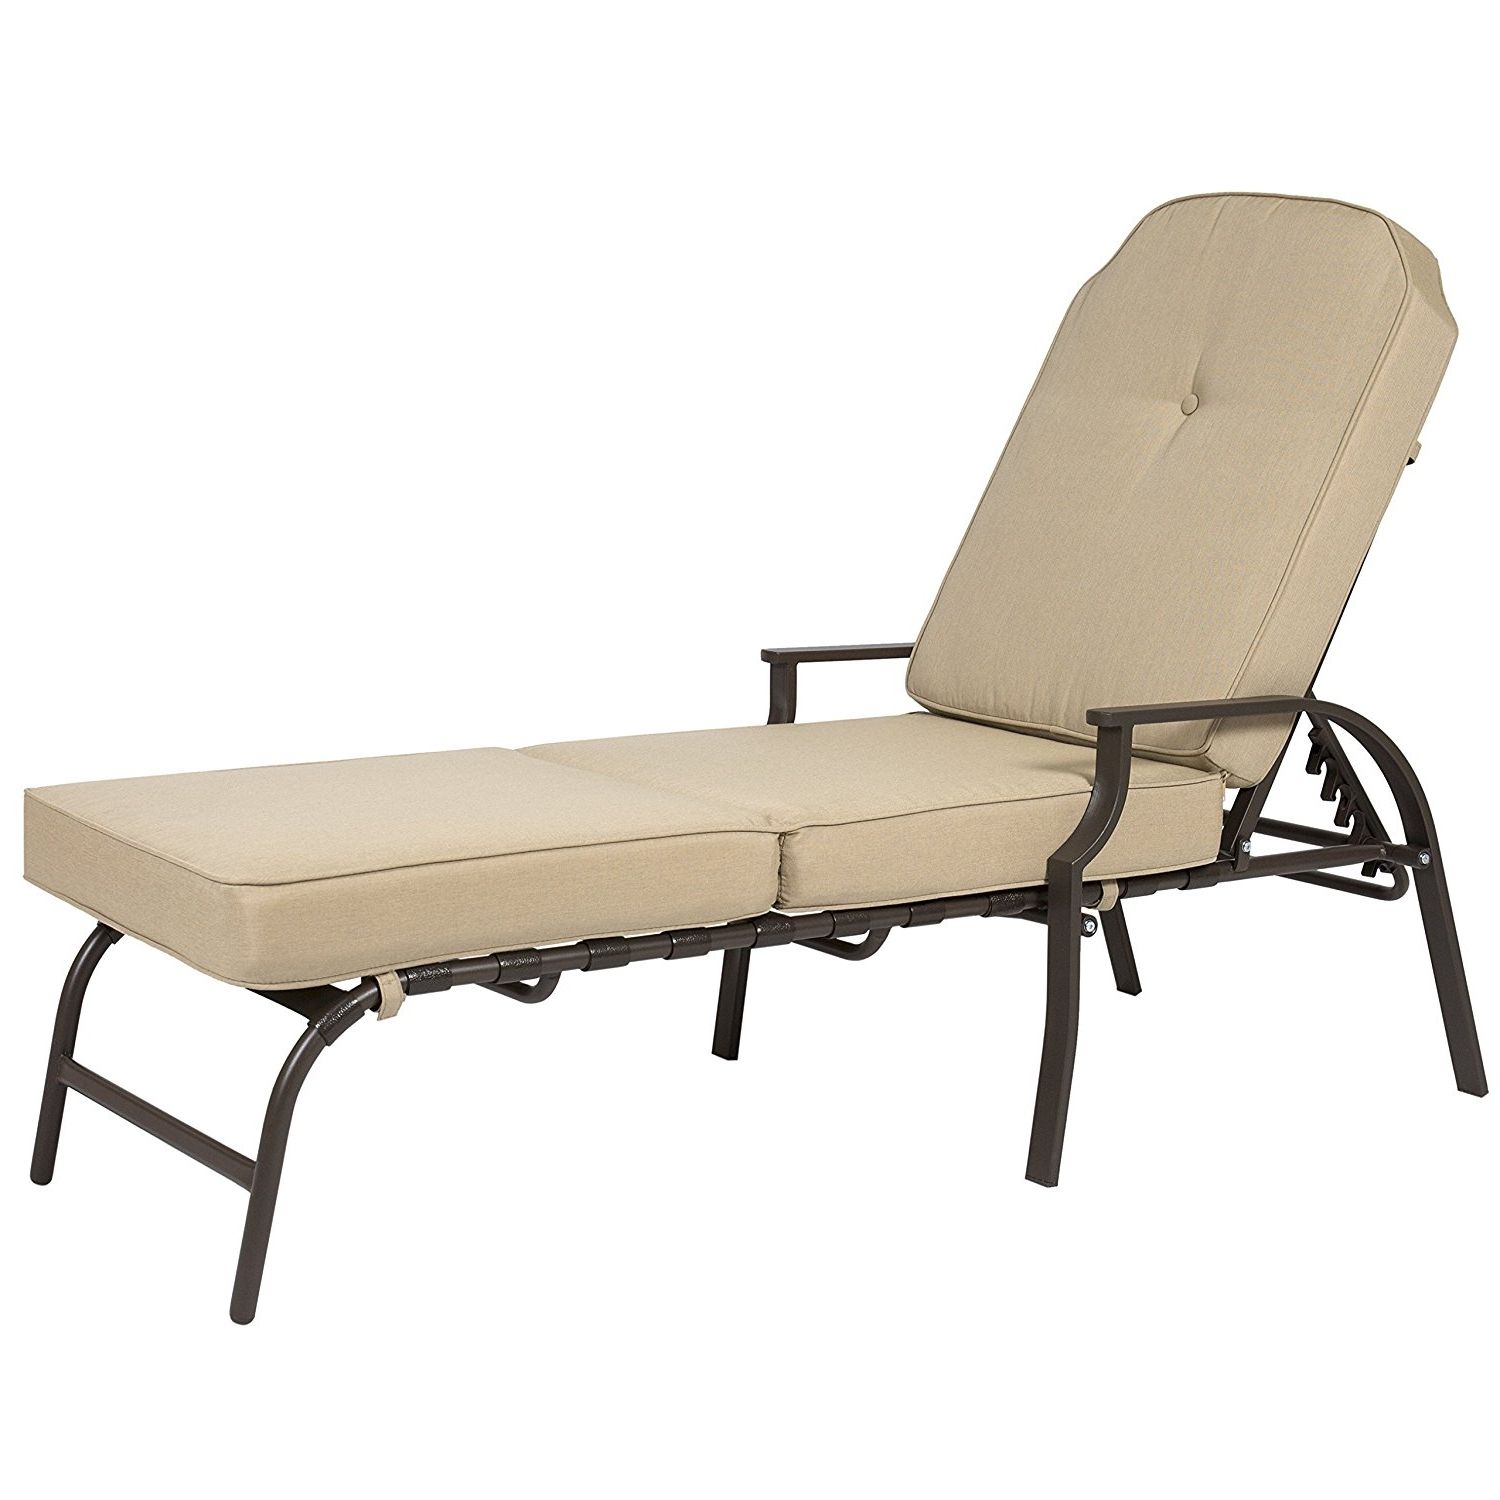 Popular Amazon : Best Choice Products Outdoor Chaise Lounge Chair W With Regard To Chaise Lounge Computer Chairs (View 13 of 15)